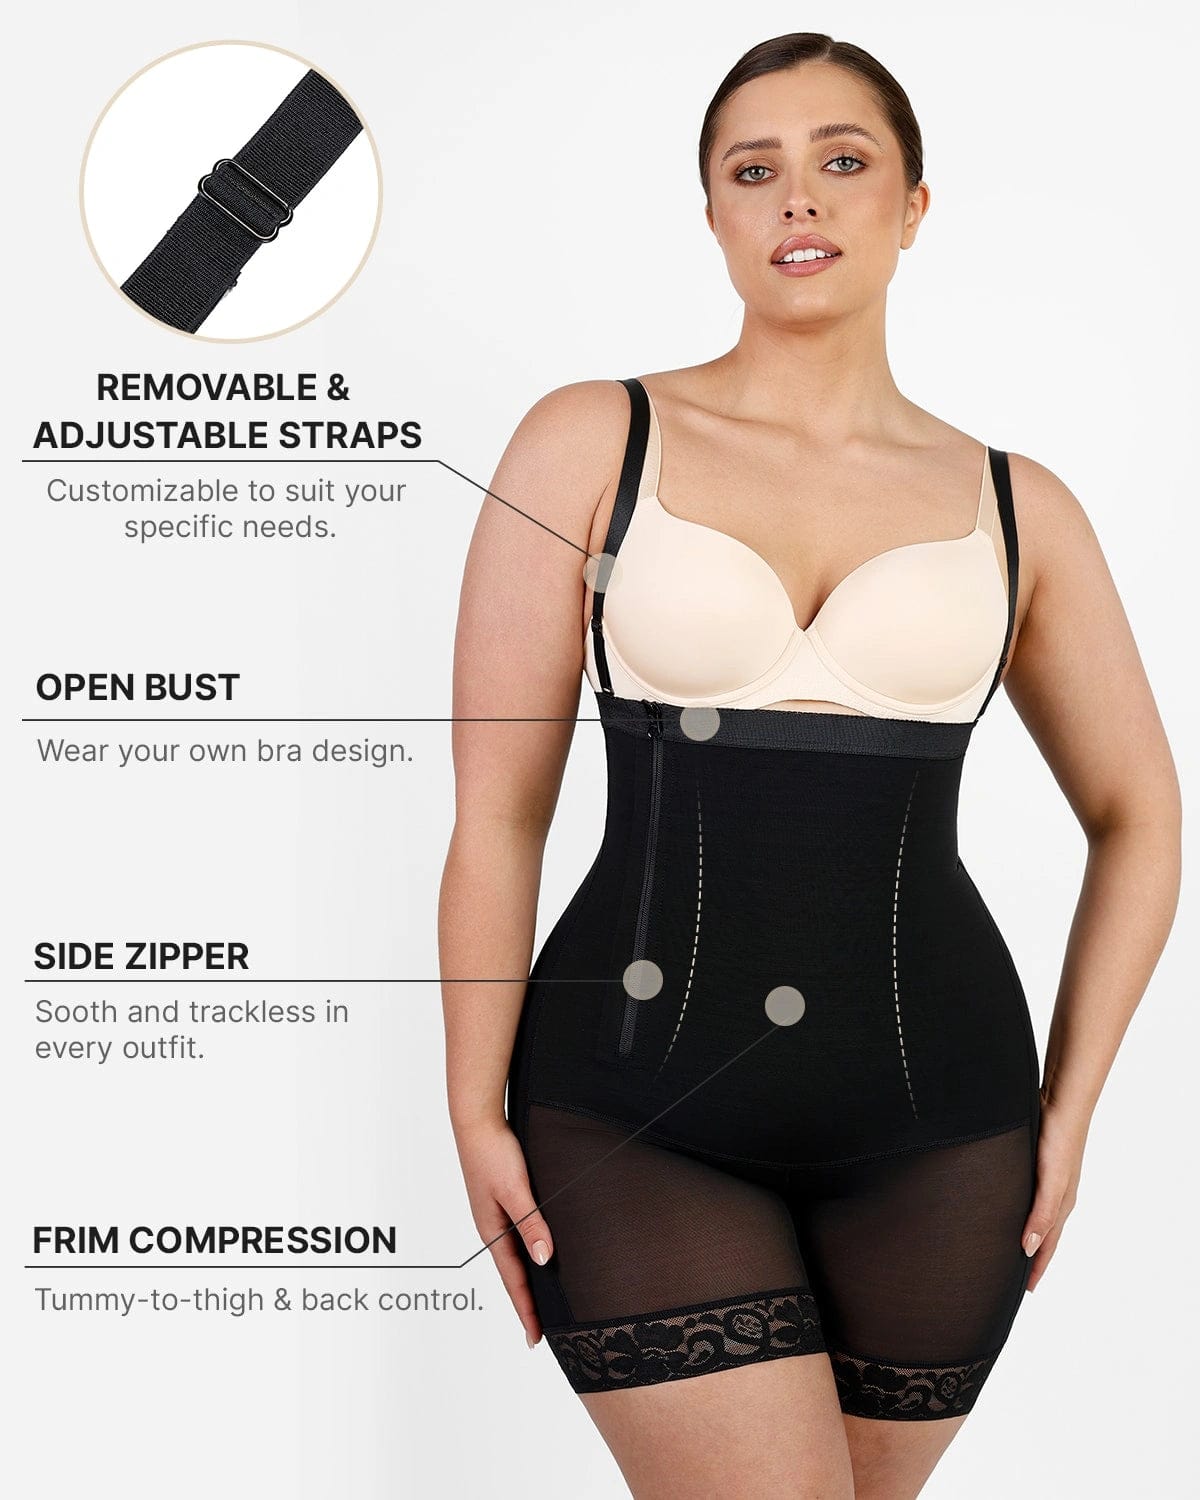 AirSlim Firm Tummy Bodysuit With Butt Lifter for Sale in Lake View